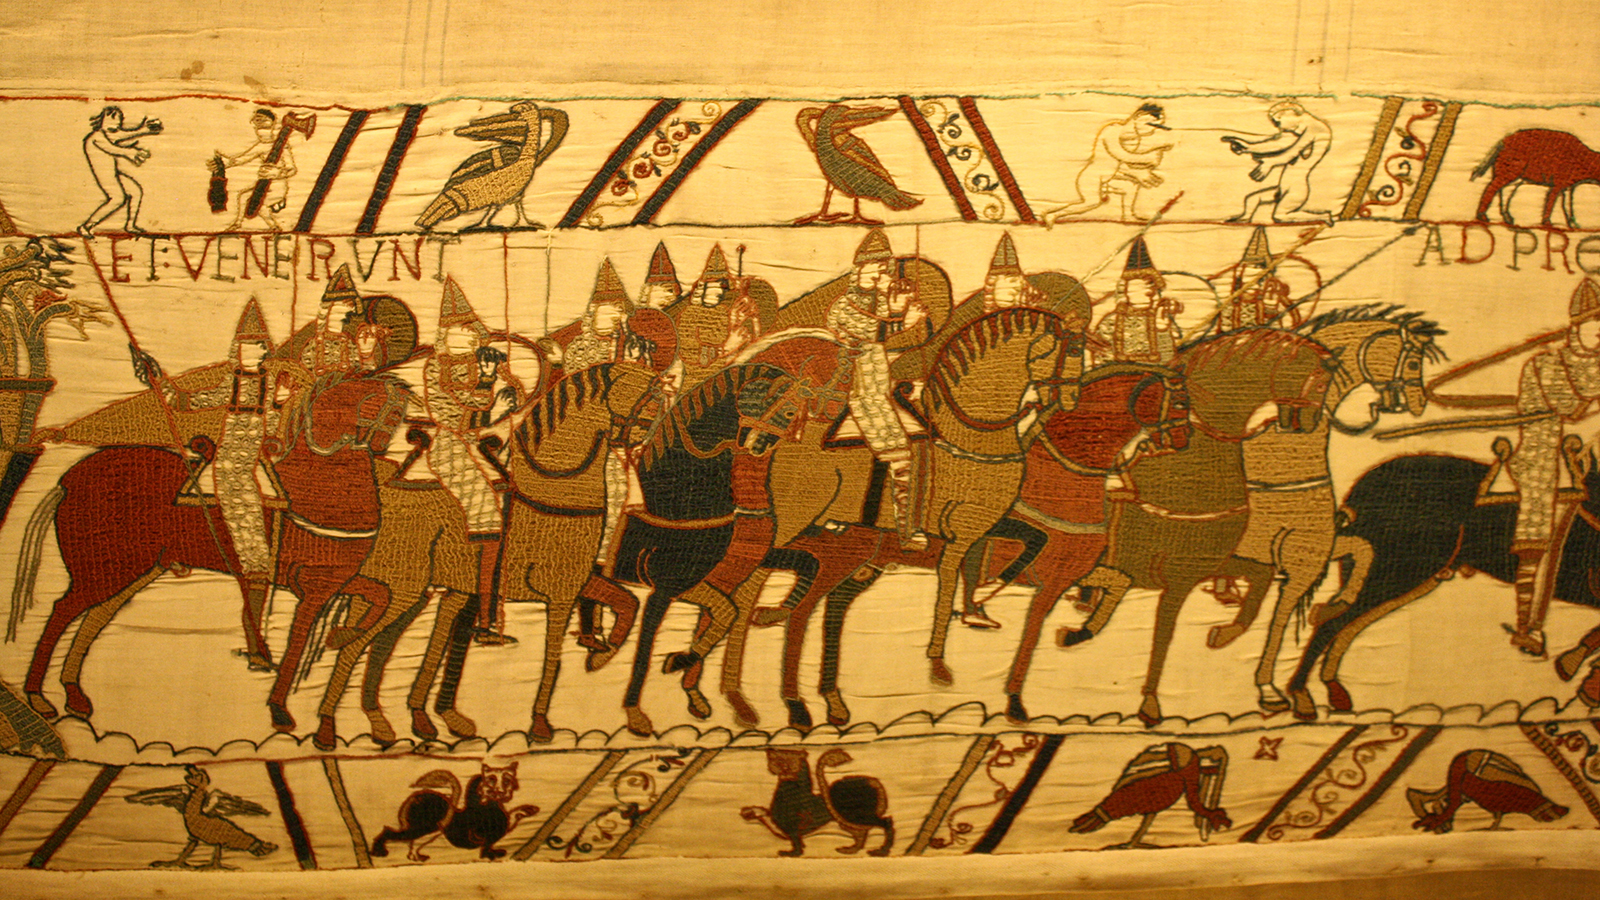 Scene 48 of the Bayeux Tapestry